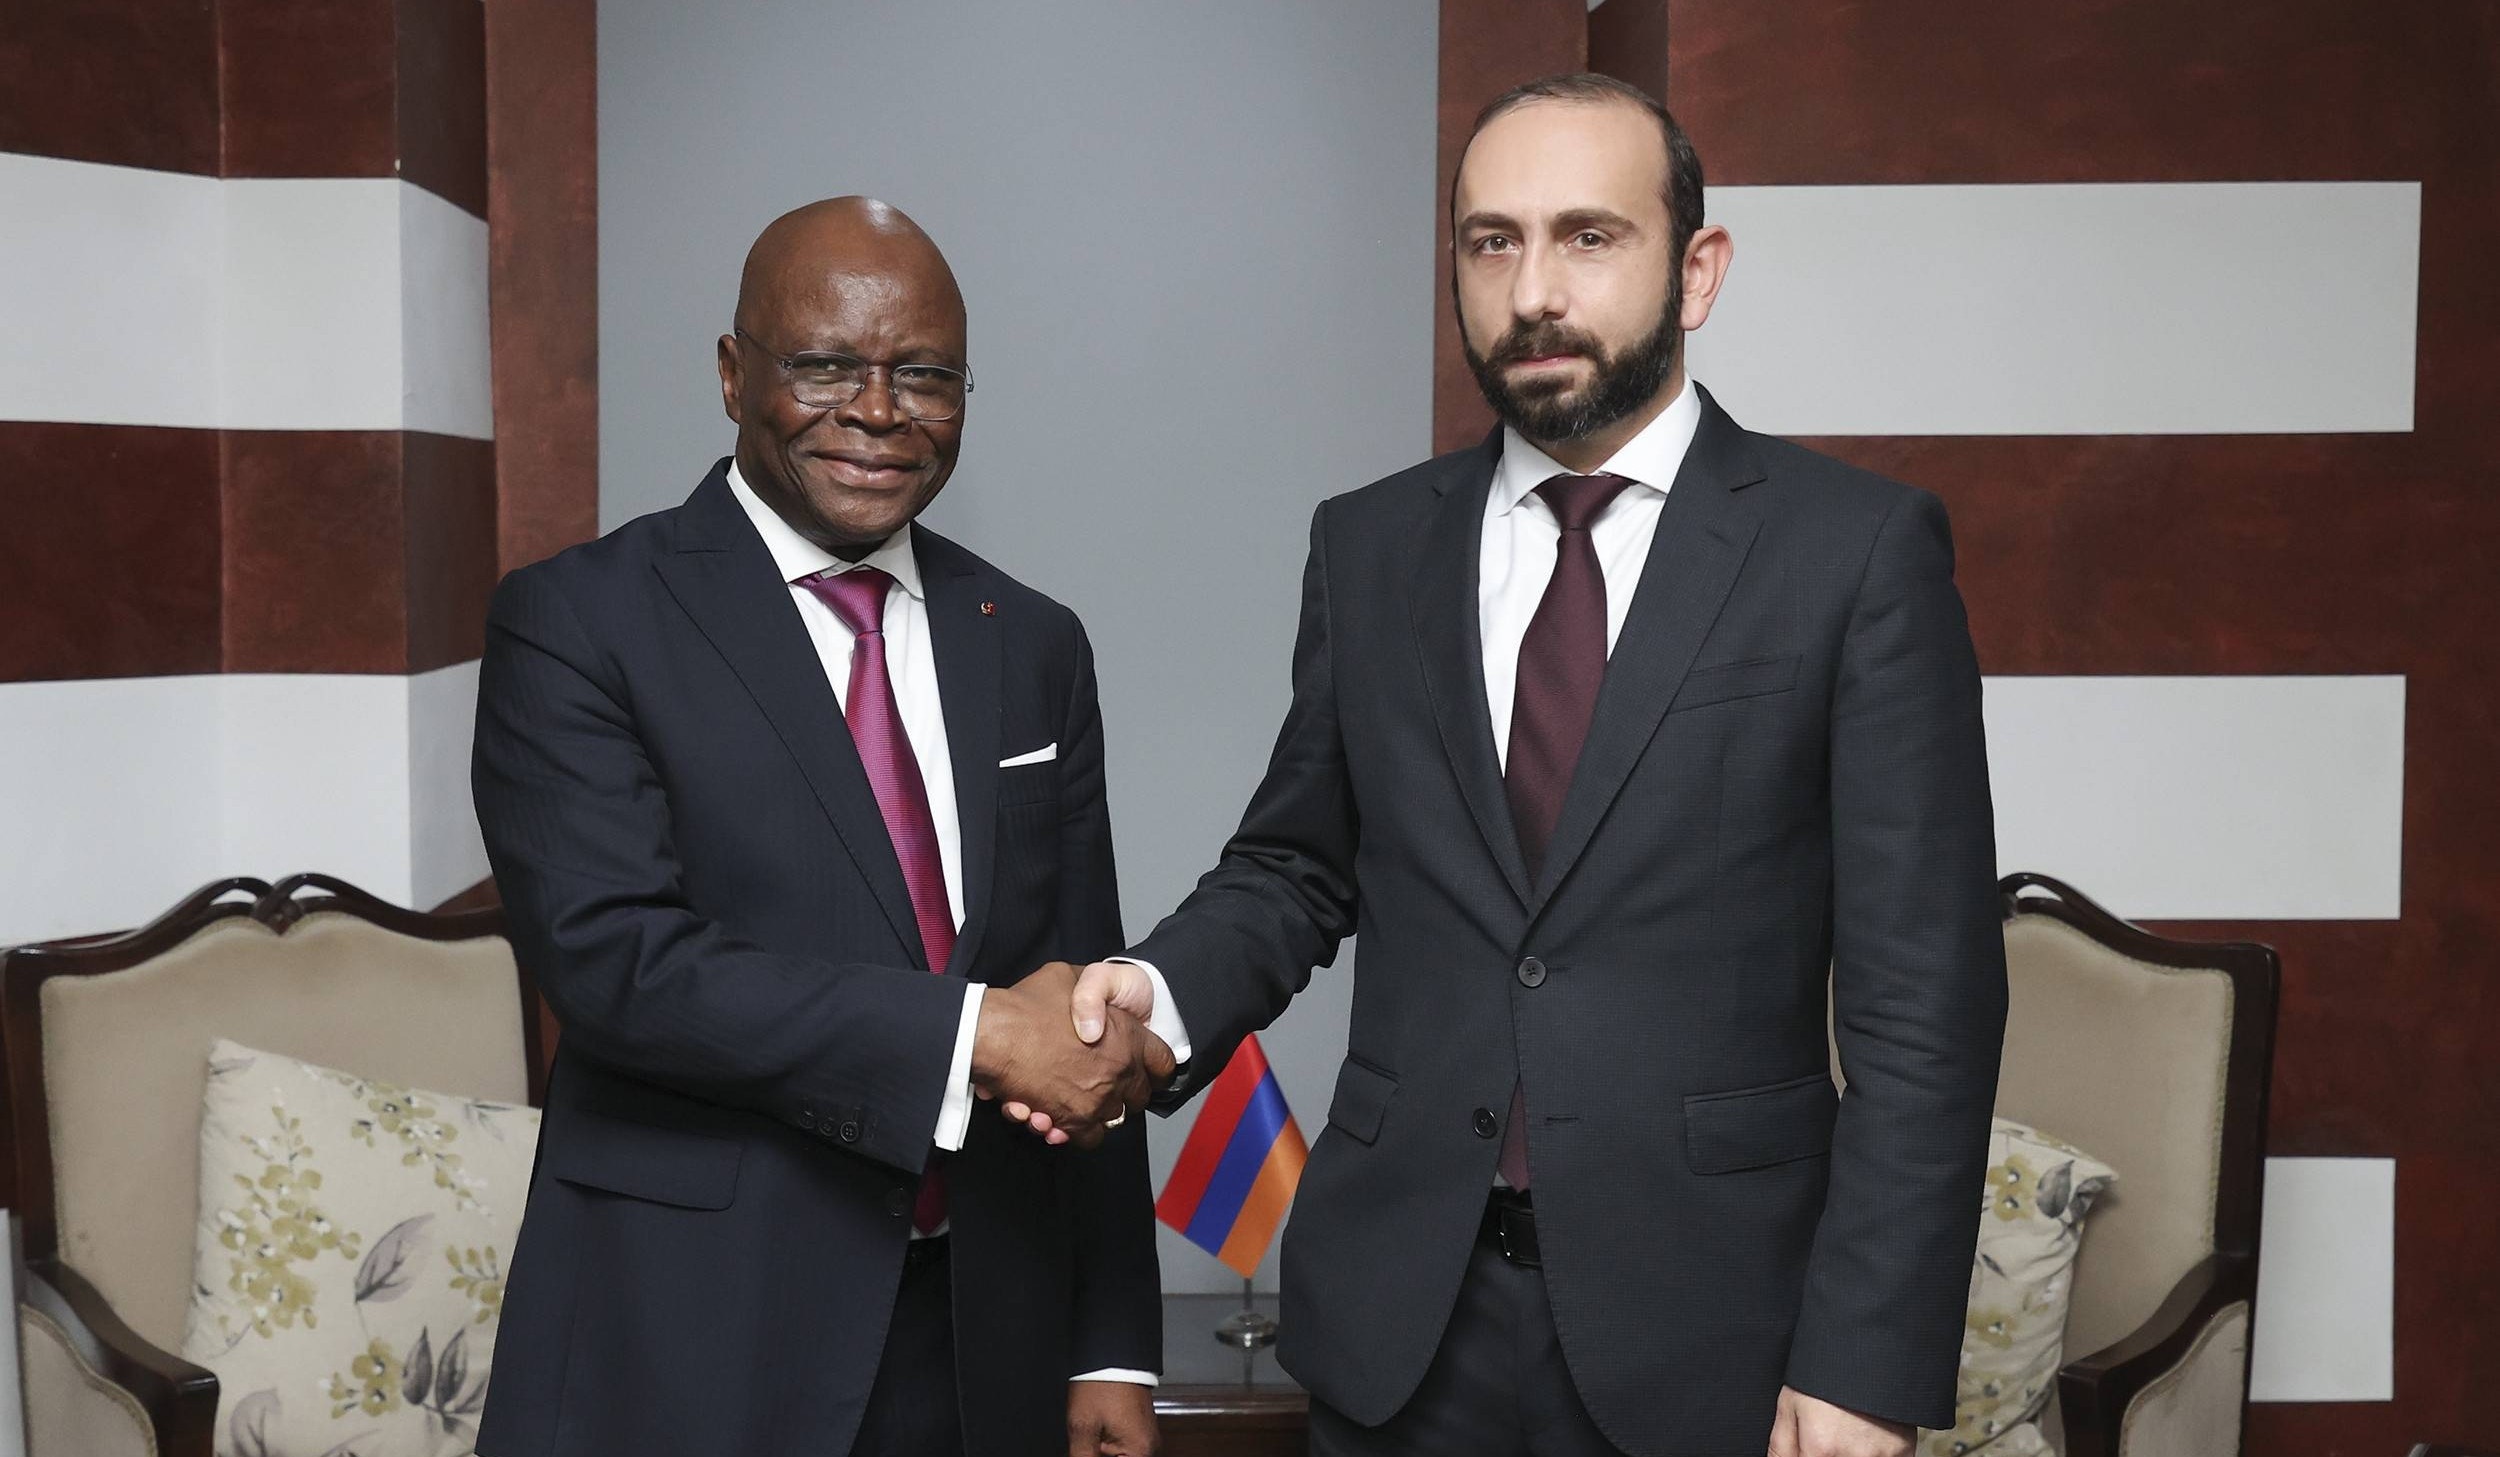 Meeting of Foreign Ministers of Armenia and Benin